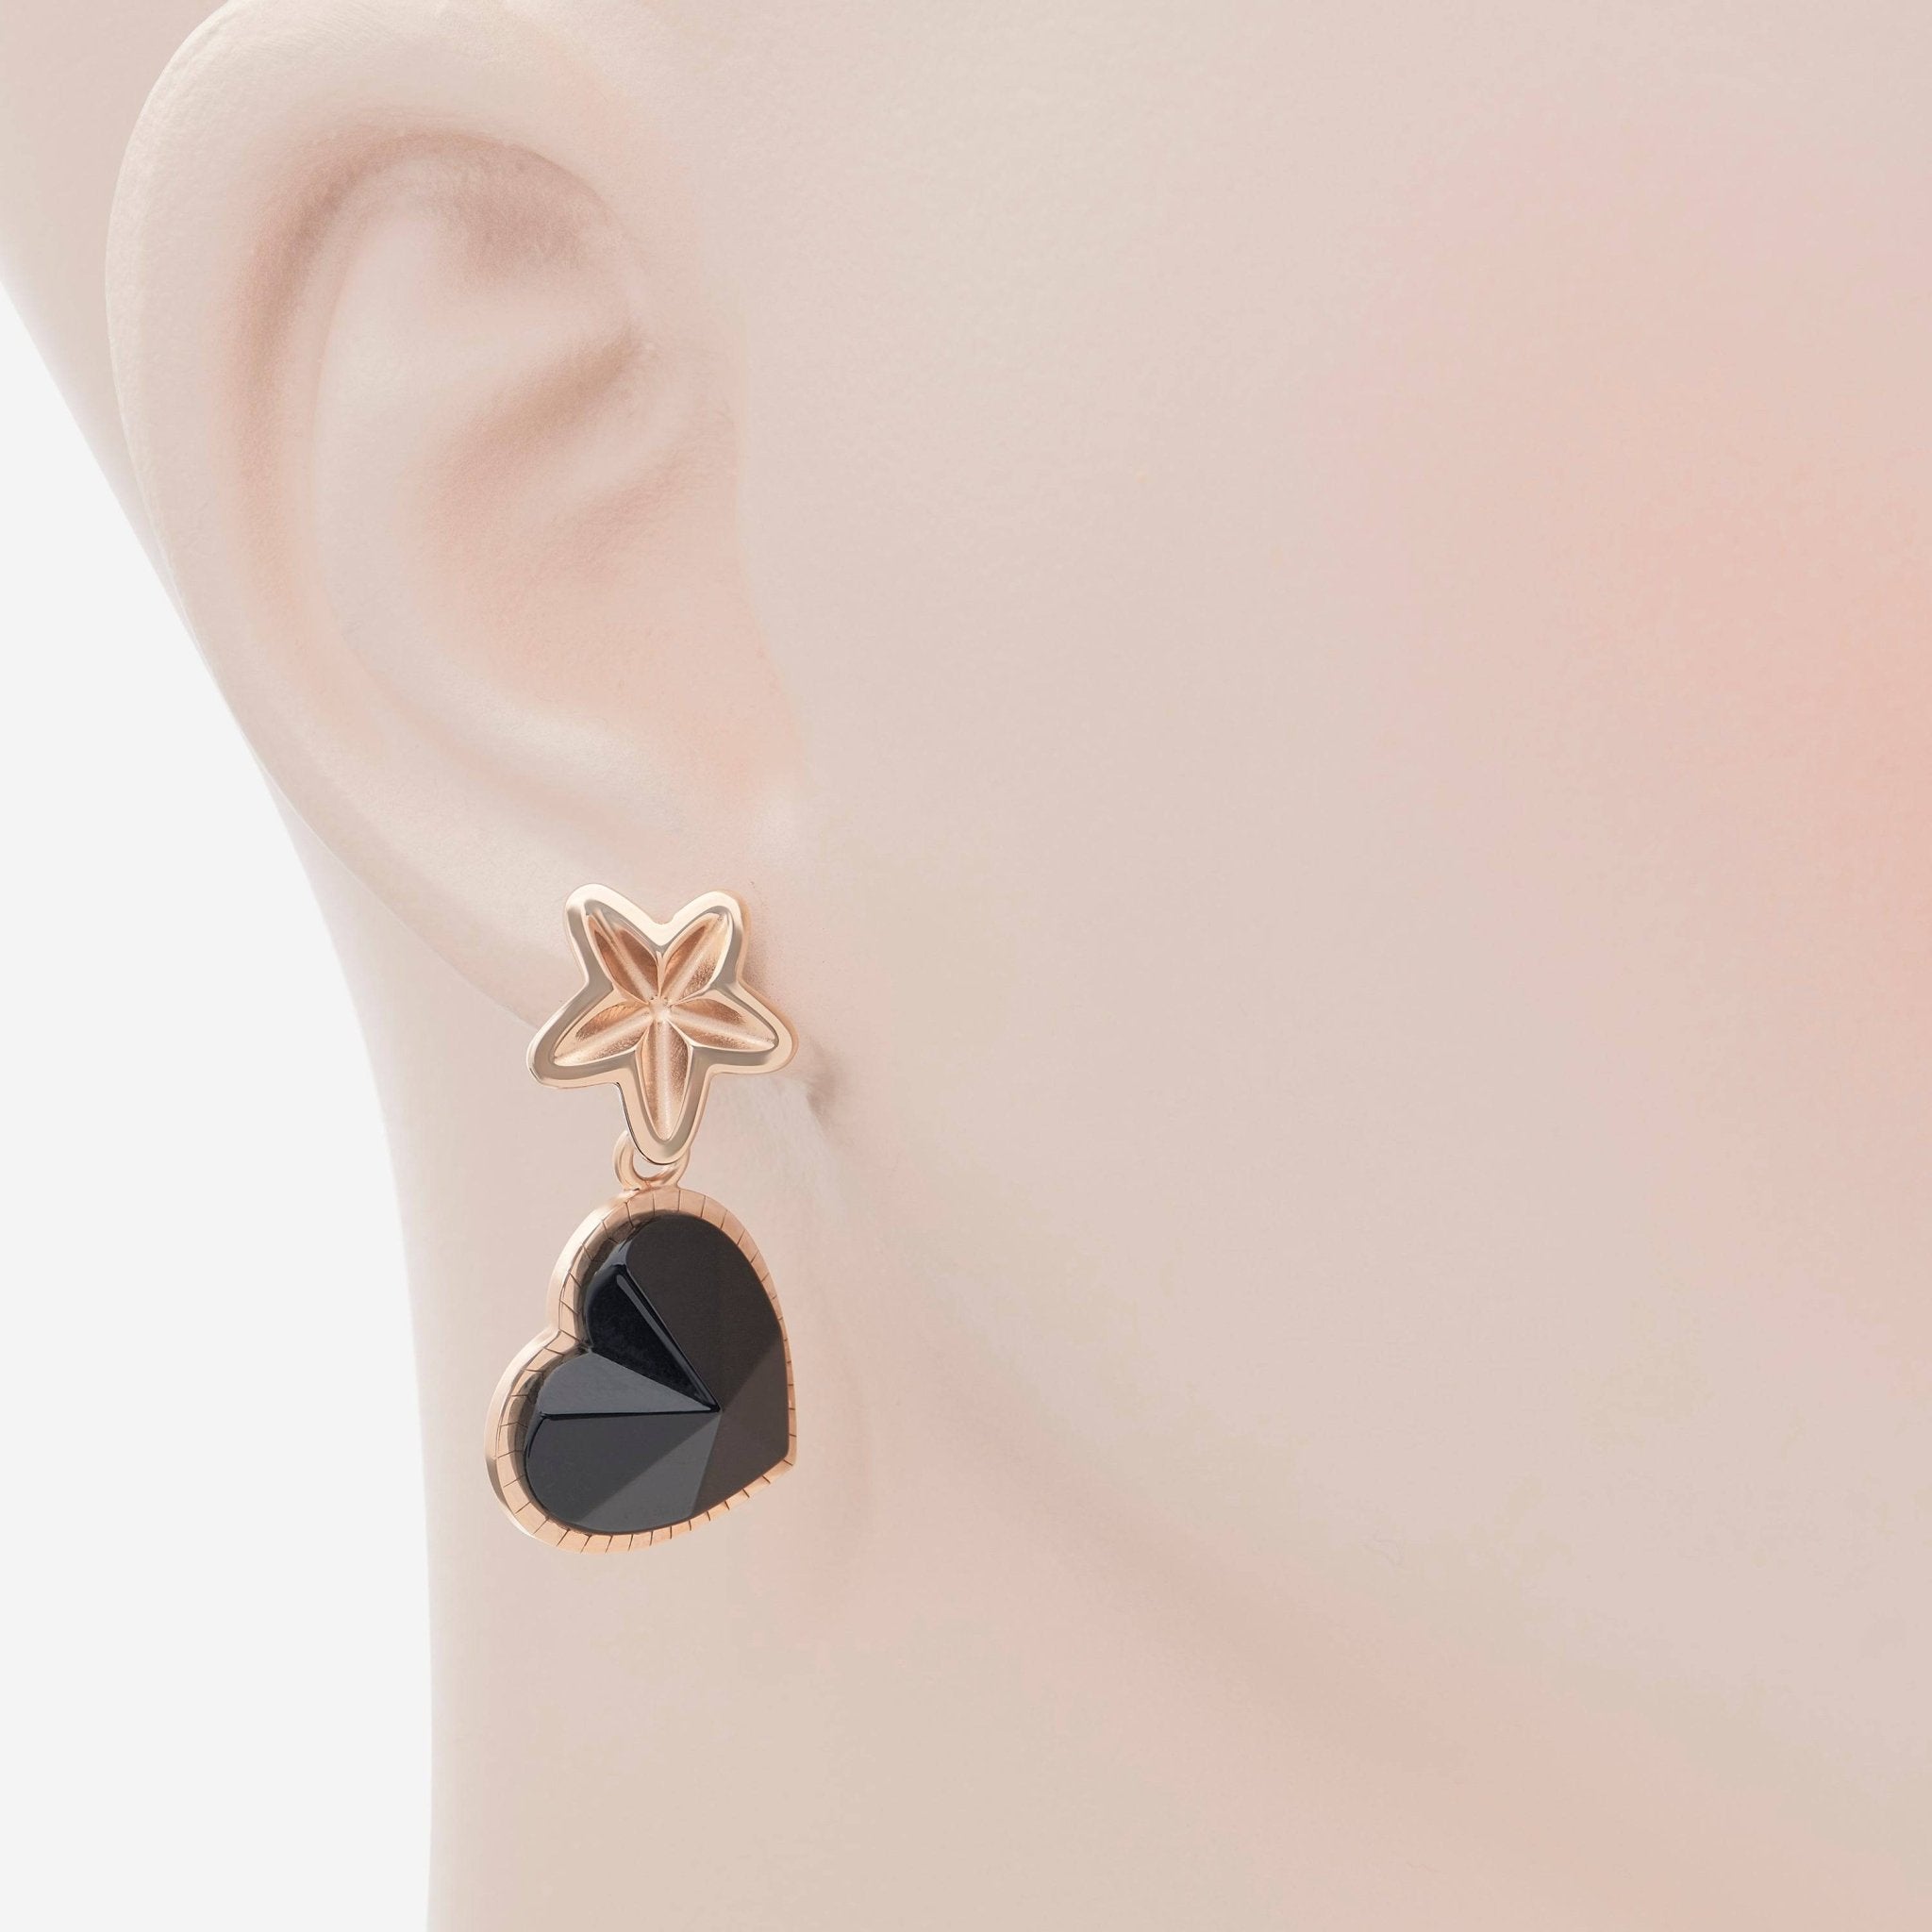 Baccarat 18K Gold Plated on Sterling Silver, Black Crystal Heart And Star Drop Earrings 2812901 - THE SOLIST - Baccarat